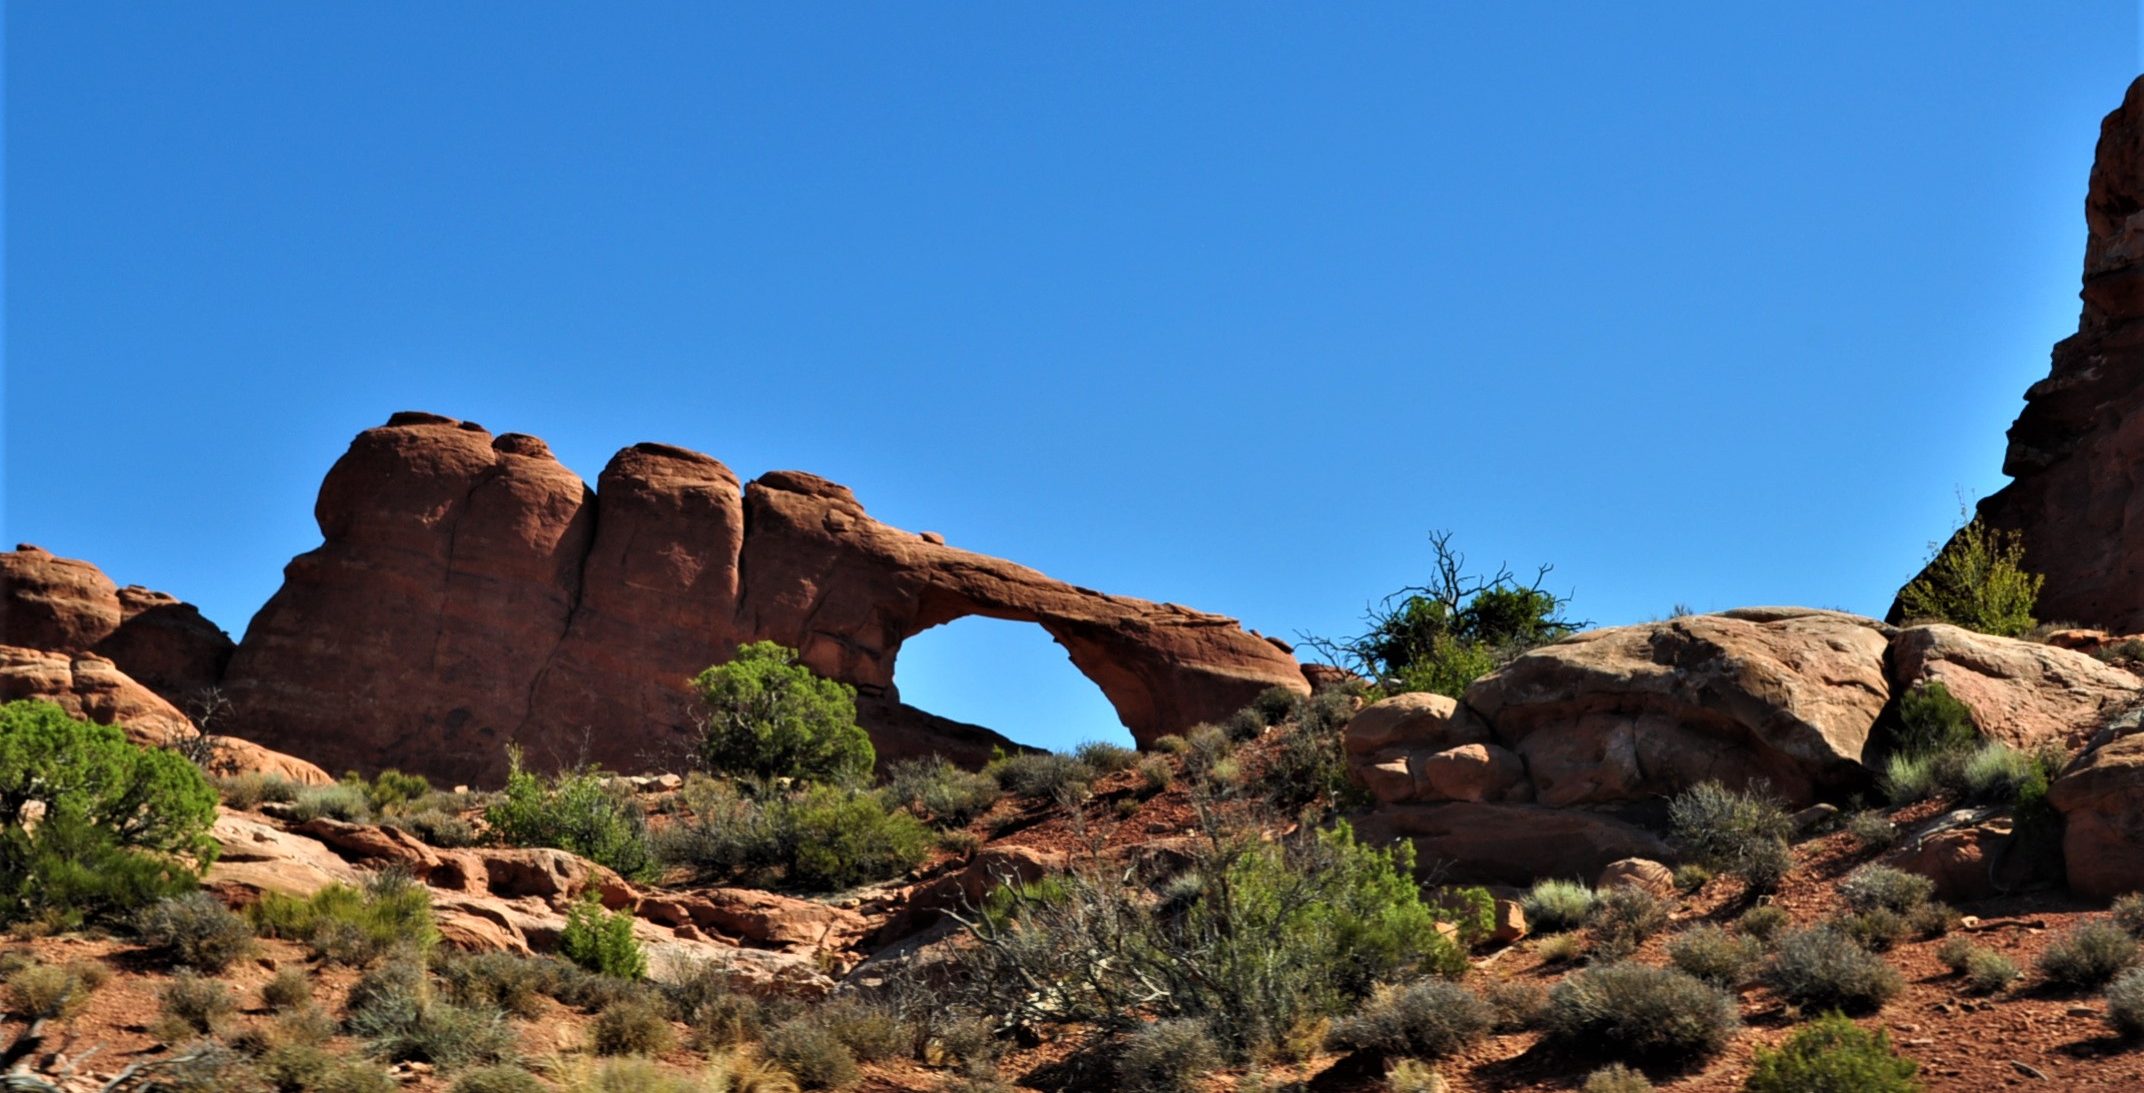 Roadschooling Arches National Park